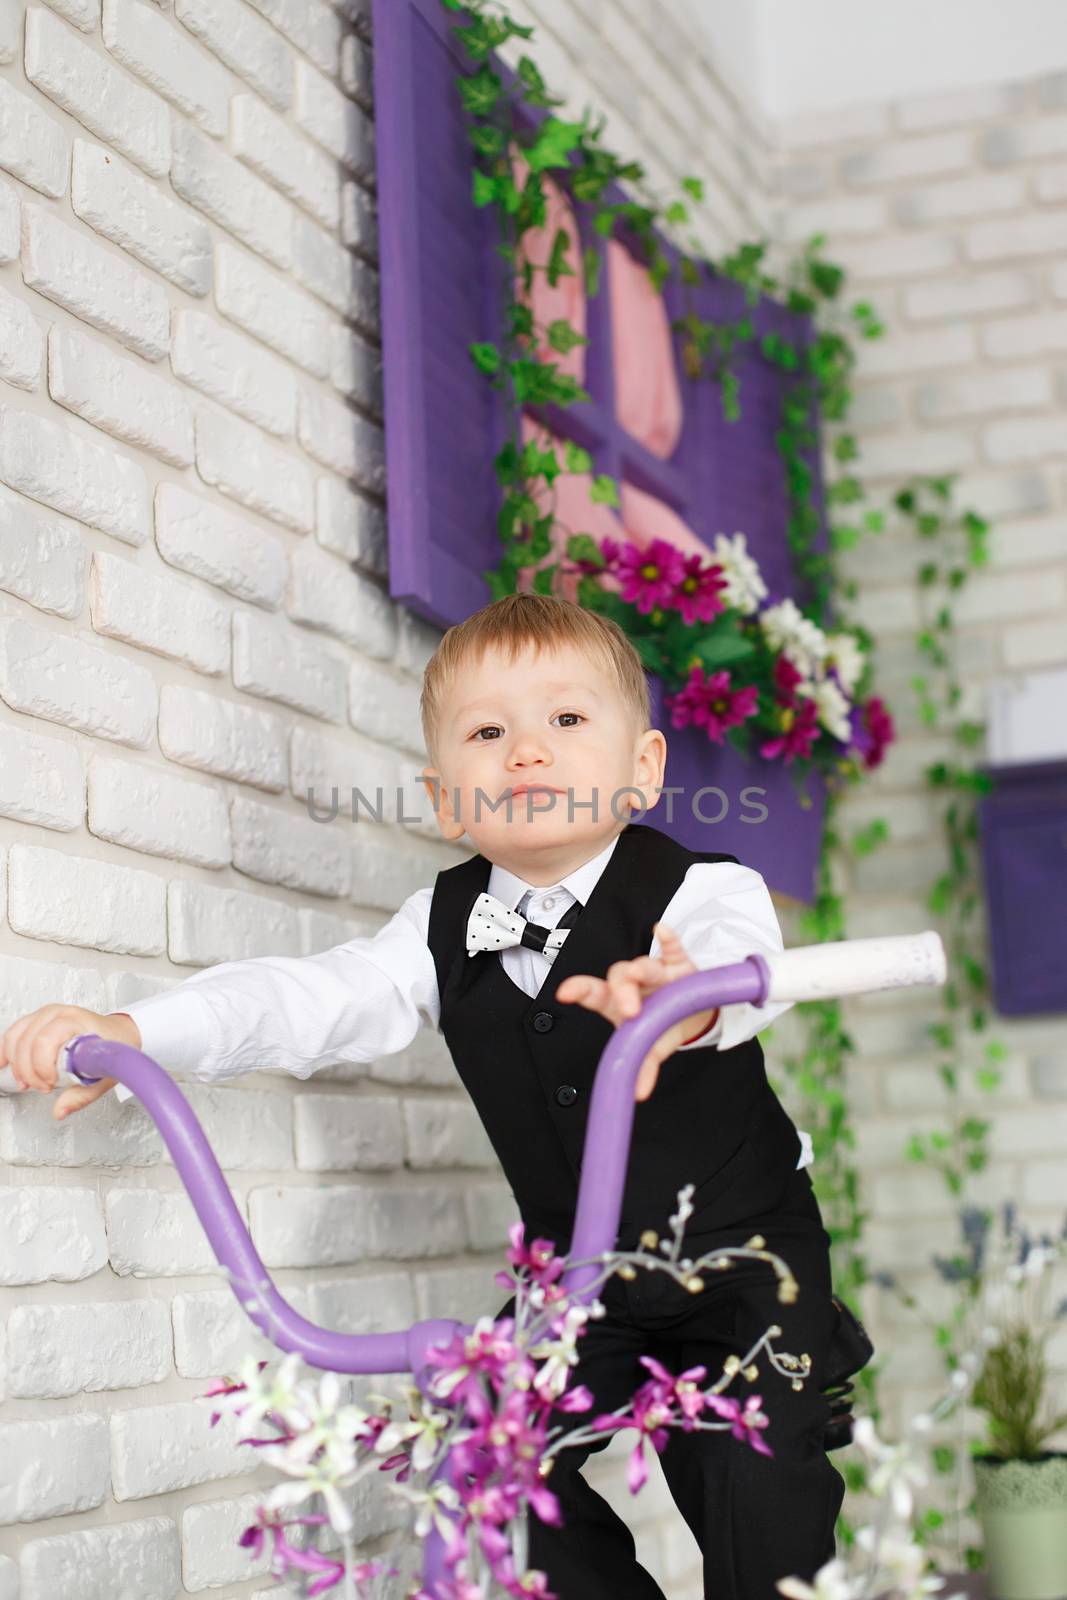 Portrait of an elegant little boy on a bicycle in studio decorated